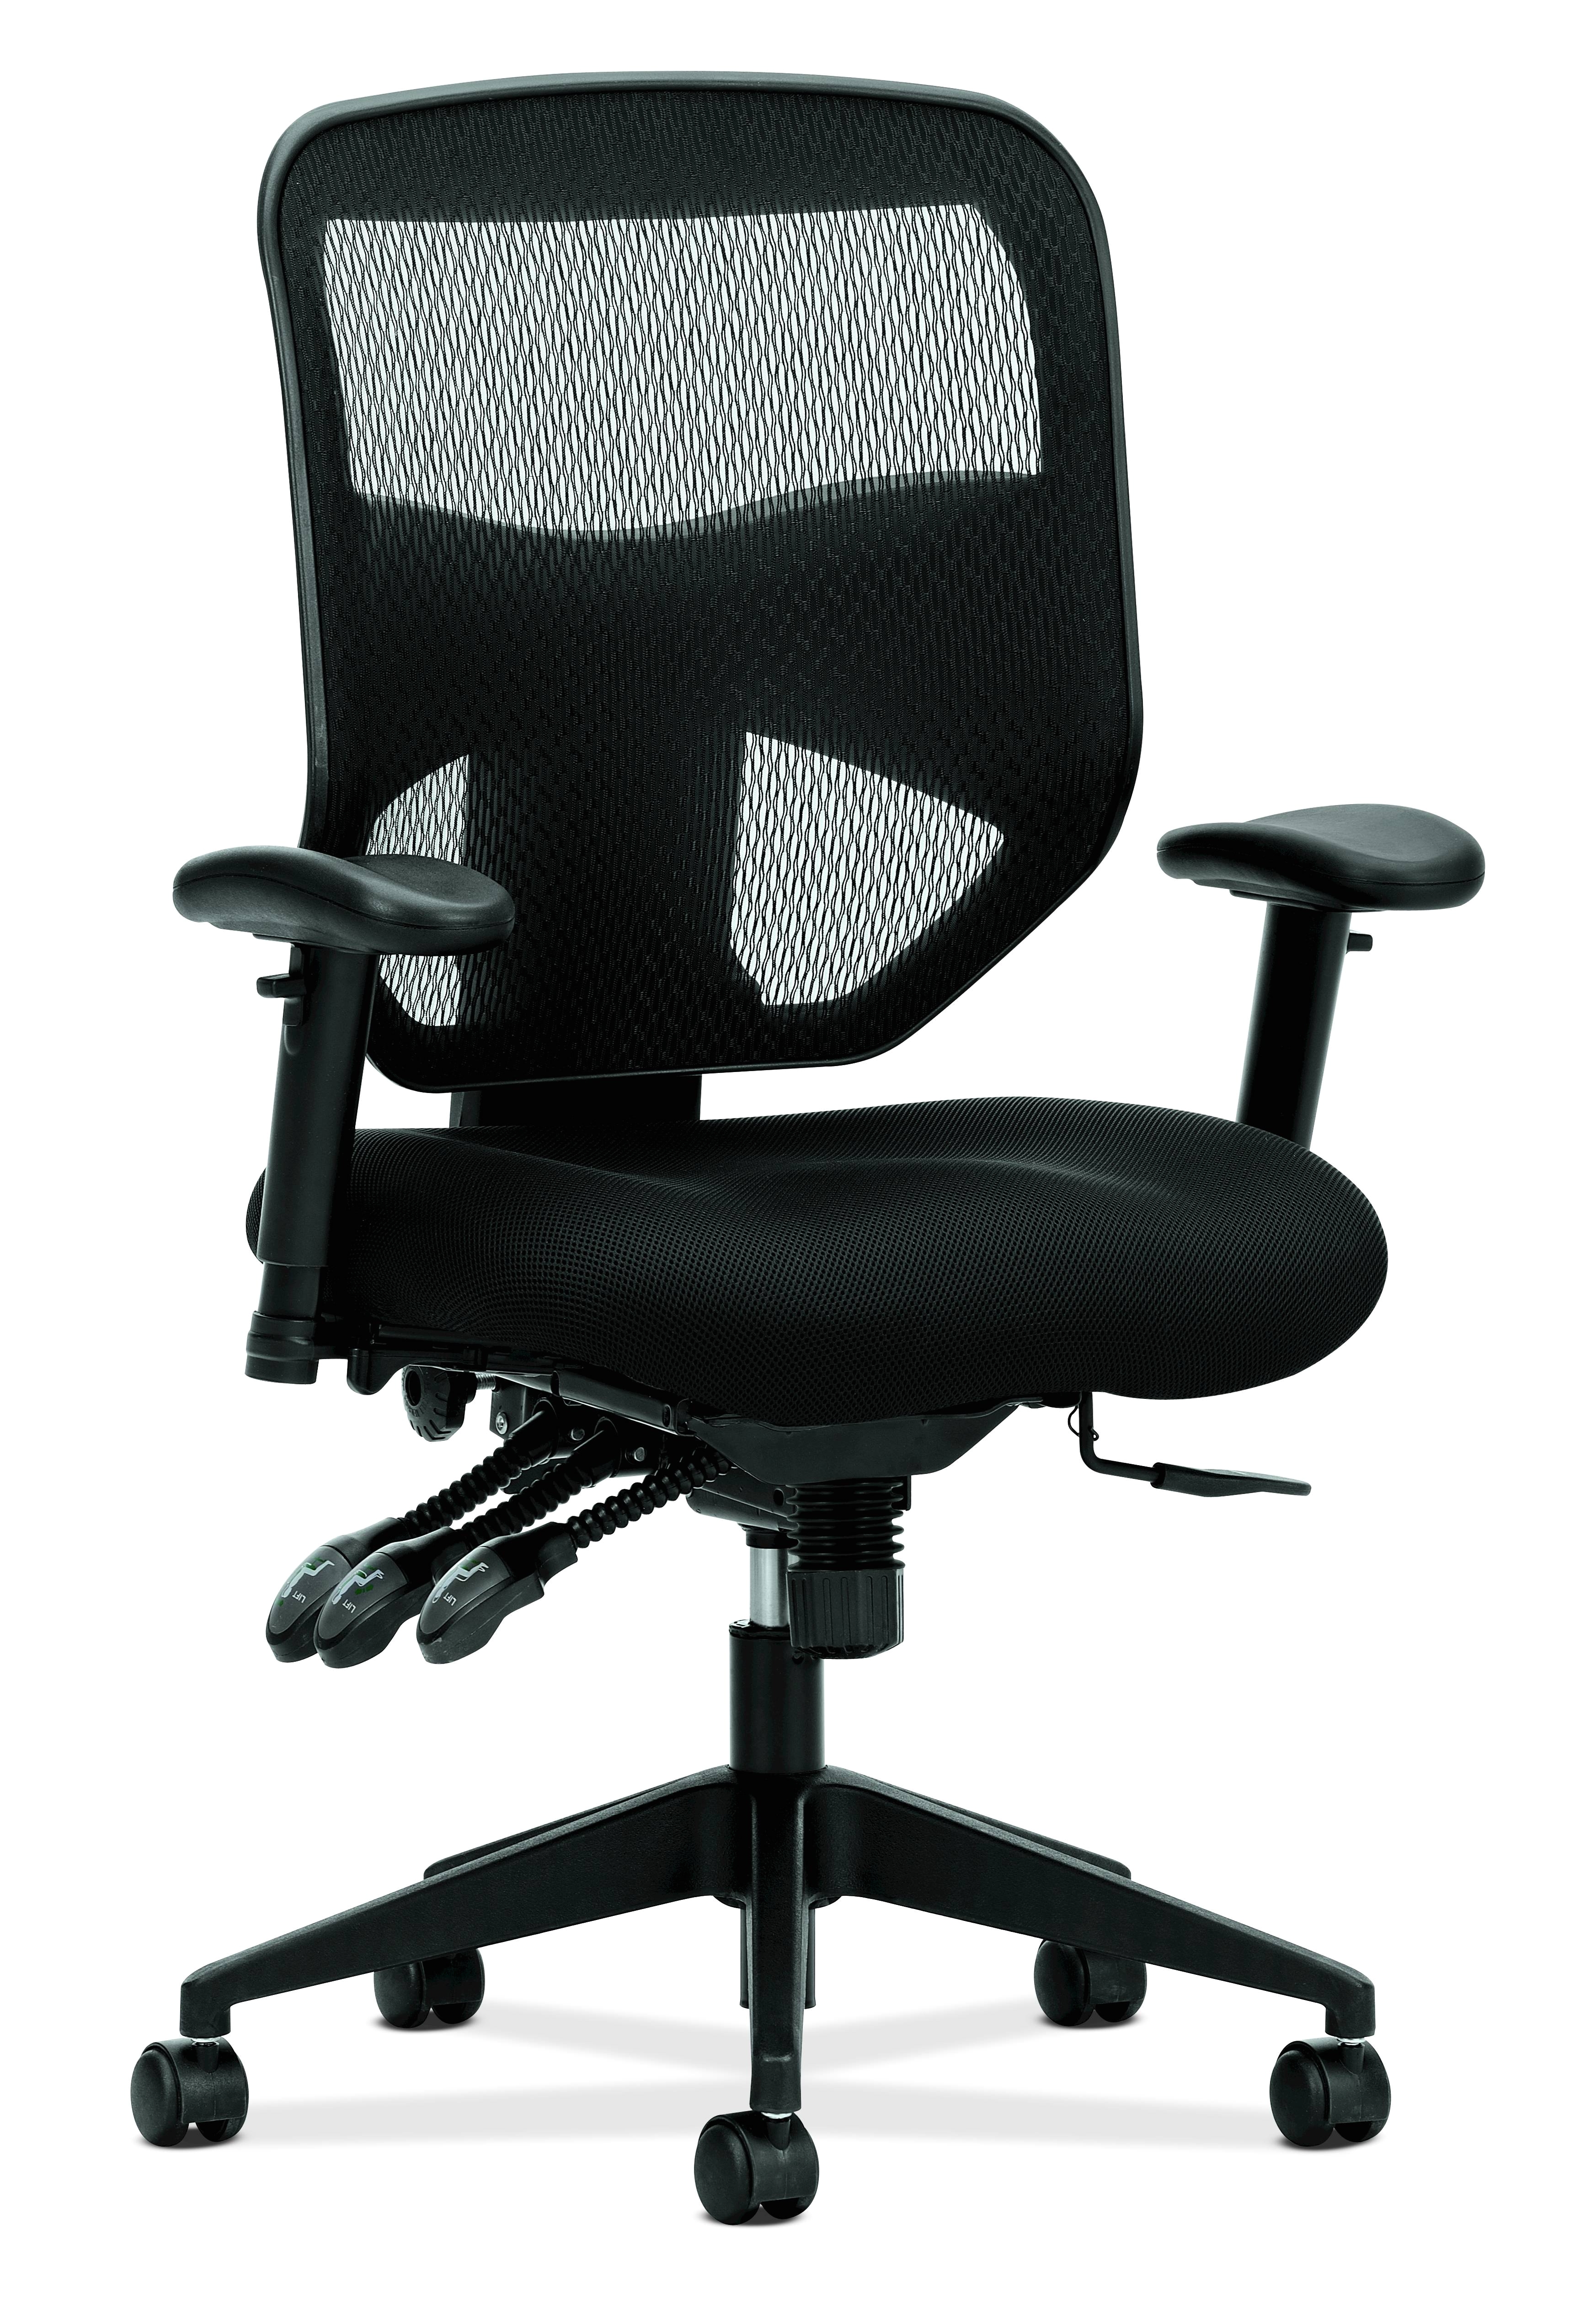 Best Way to Clean Cloth Computer Chair Basyx by Hon Vl532 Fabric High Back Chair Black by Office Depot